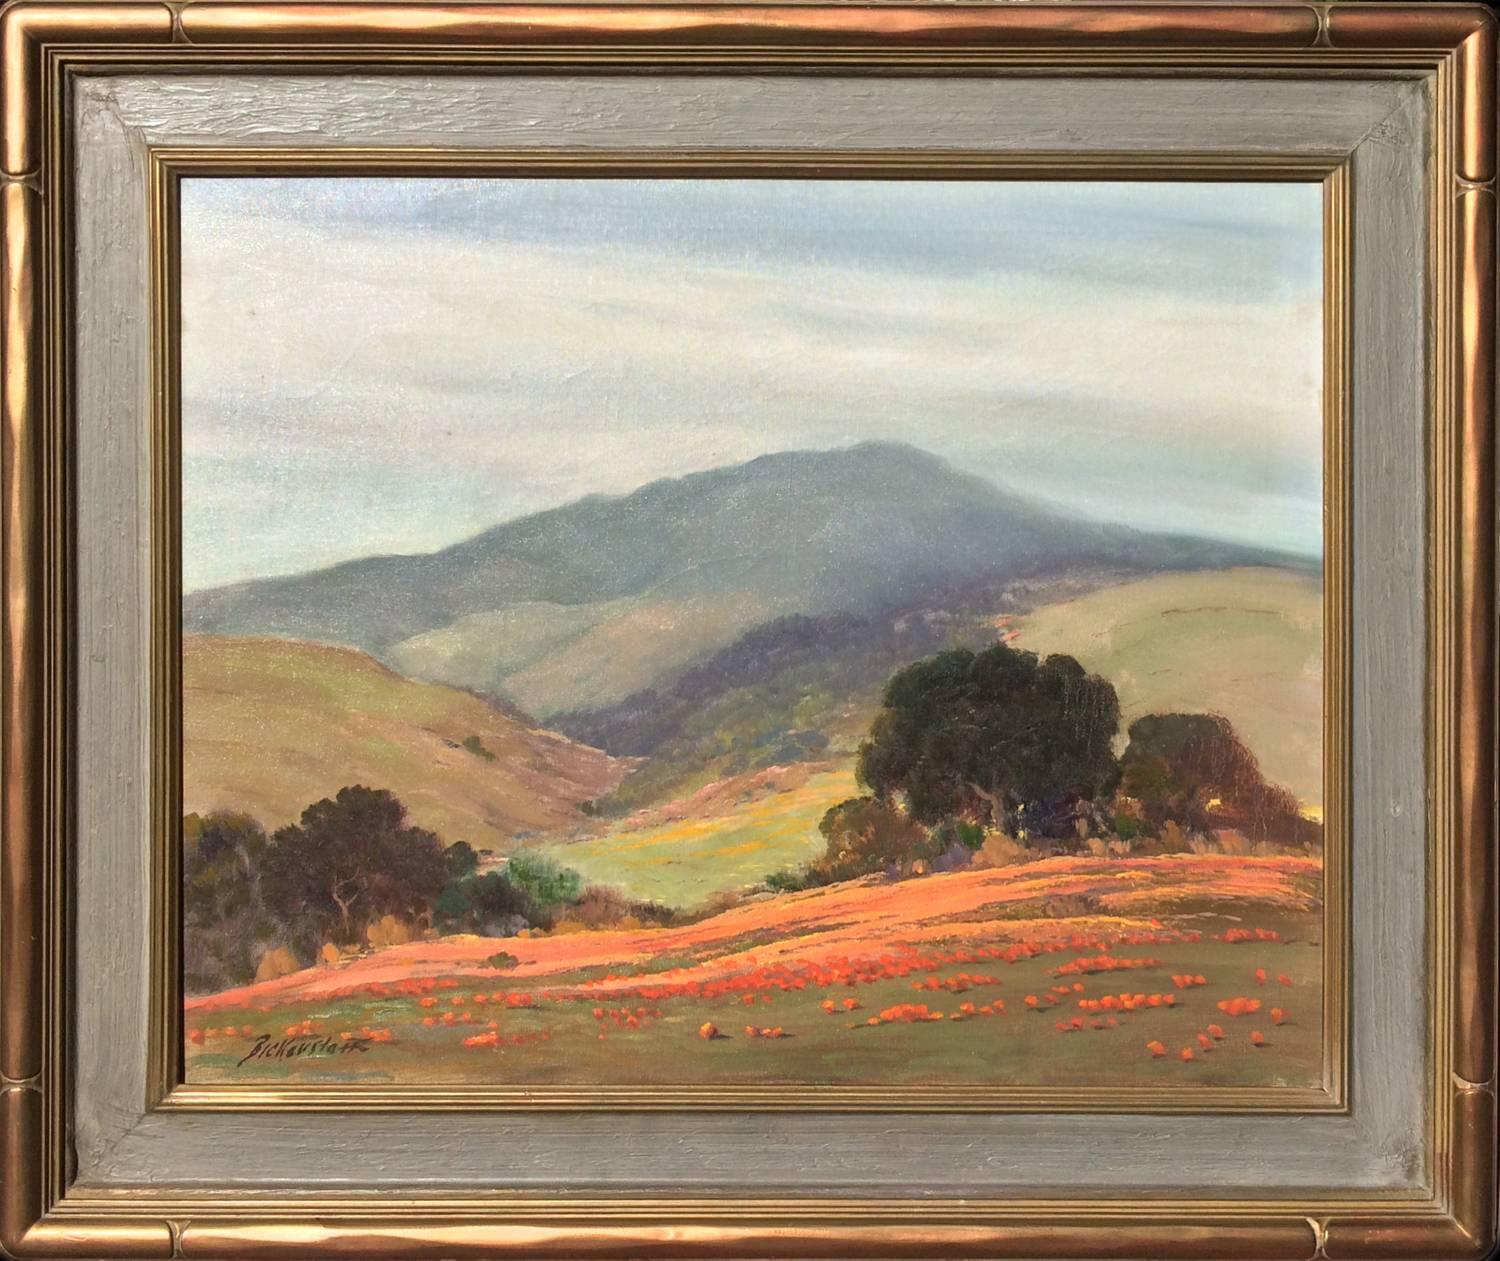 George Sanders Bickerstaff Landscape Painting - Untitled (California Landscape with Oaks and Poppies)